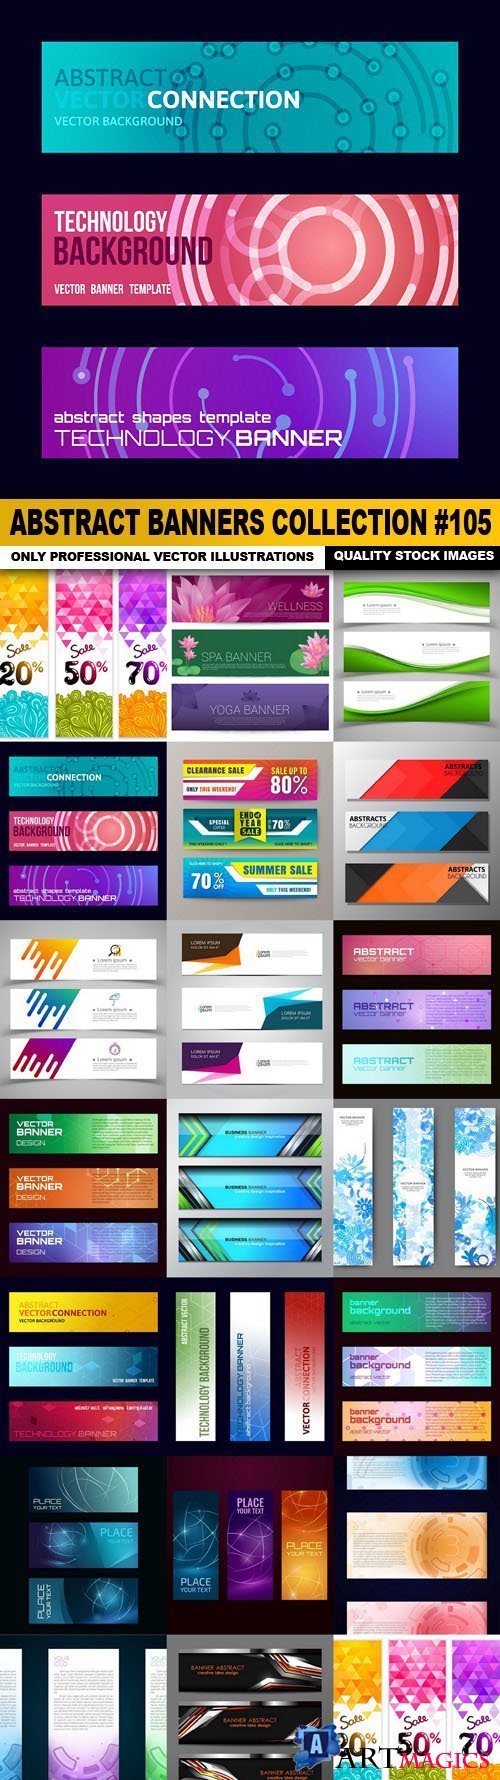 Abstract Banners Collection #105 - 20 Vectors